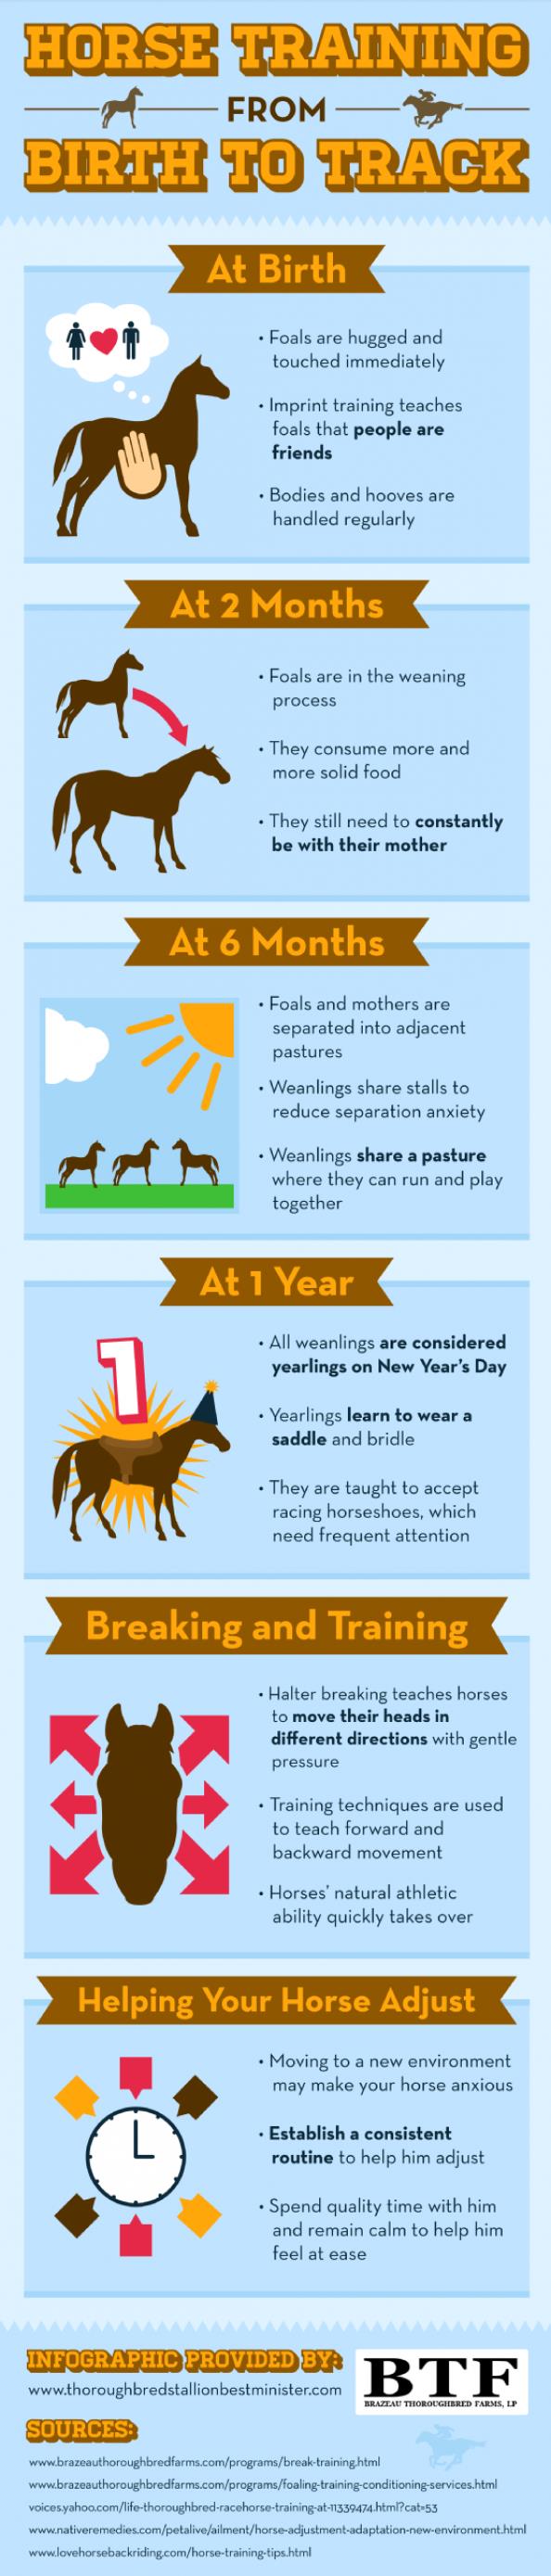 14. Horse Training from birth to track